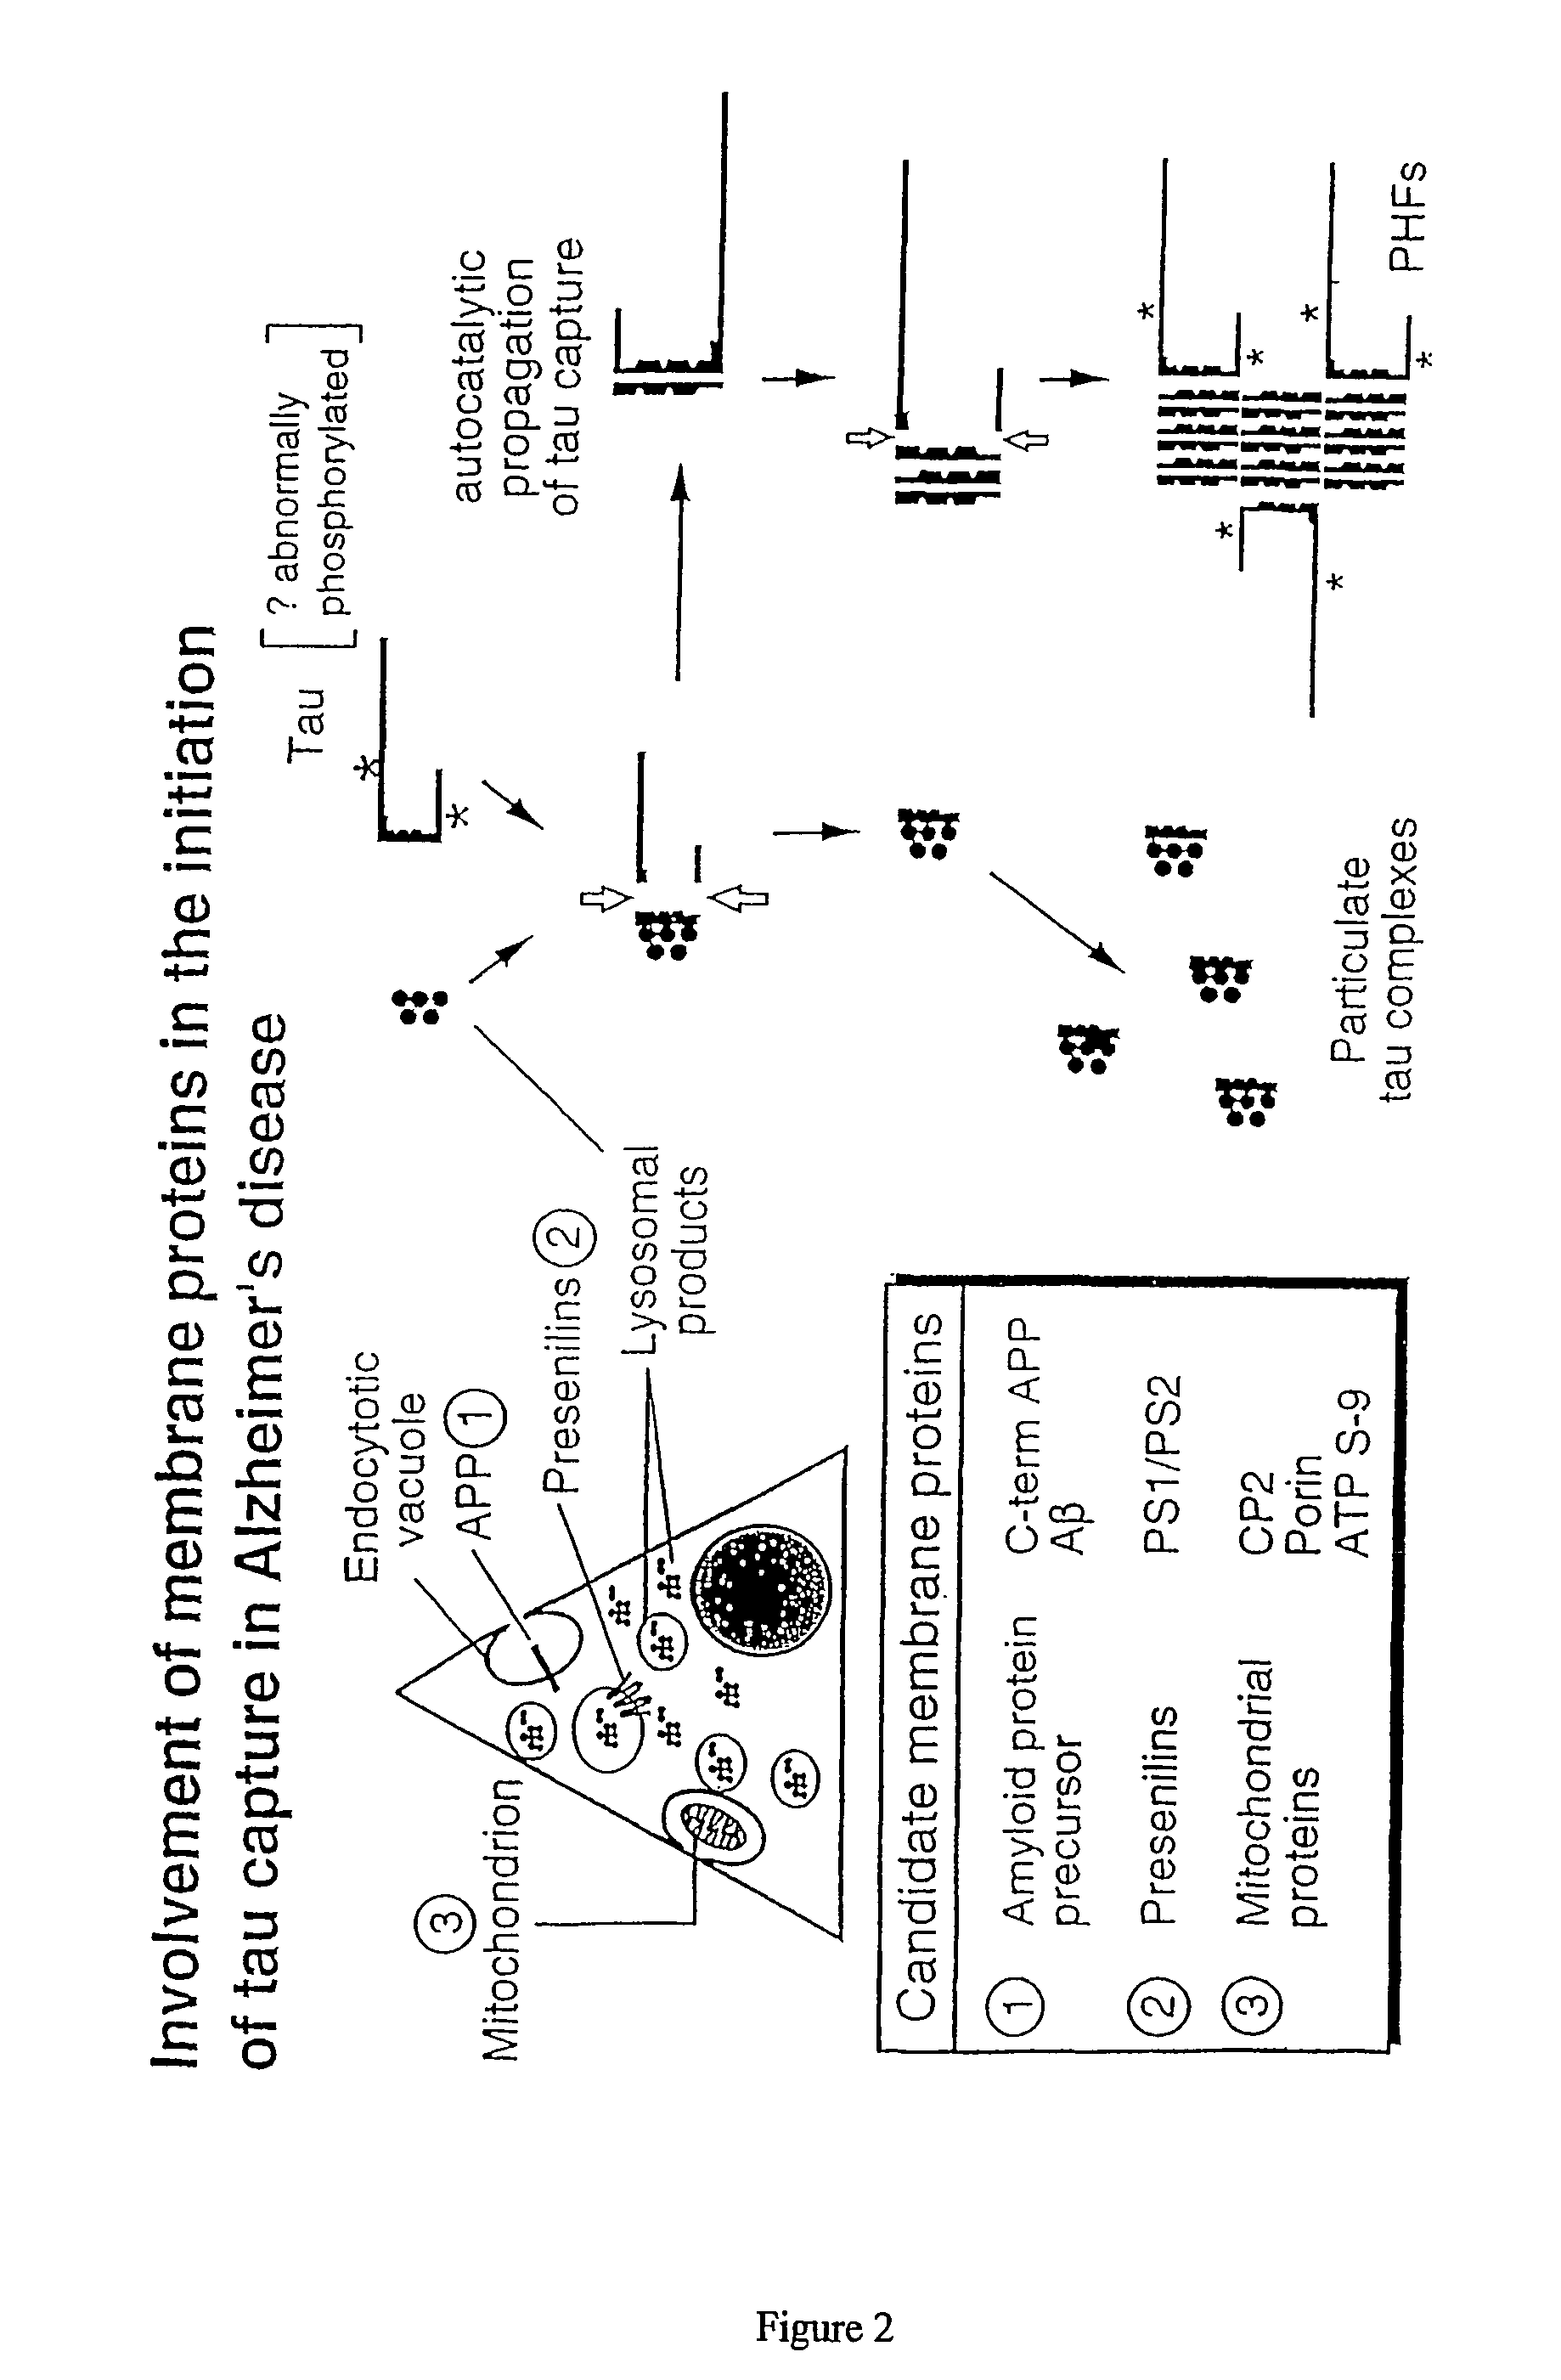 Materials and methods relating to protein aggregation in neurodegenerative disease